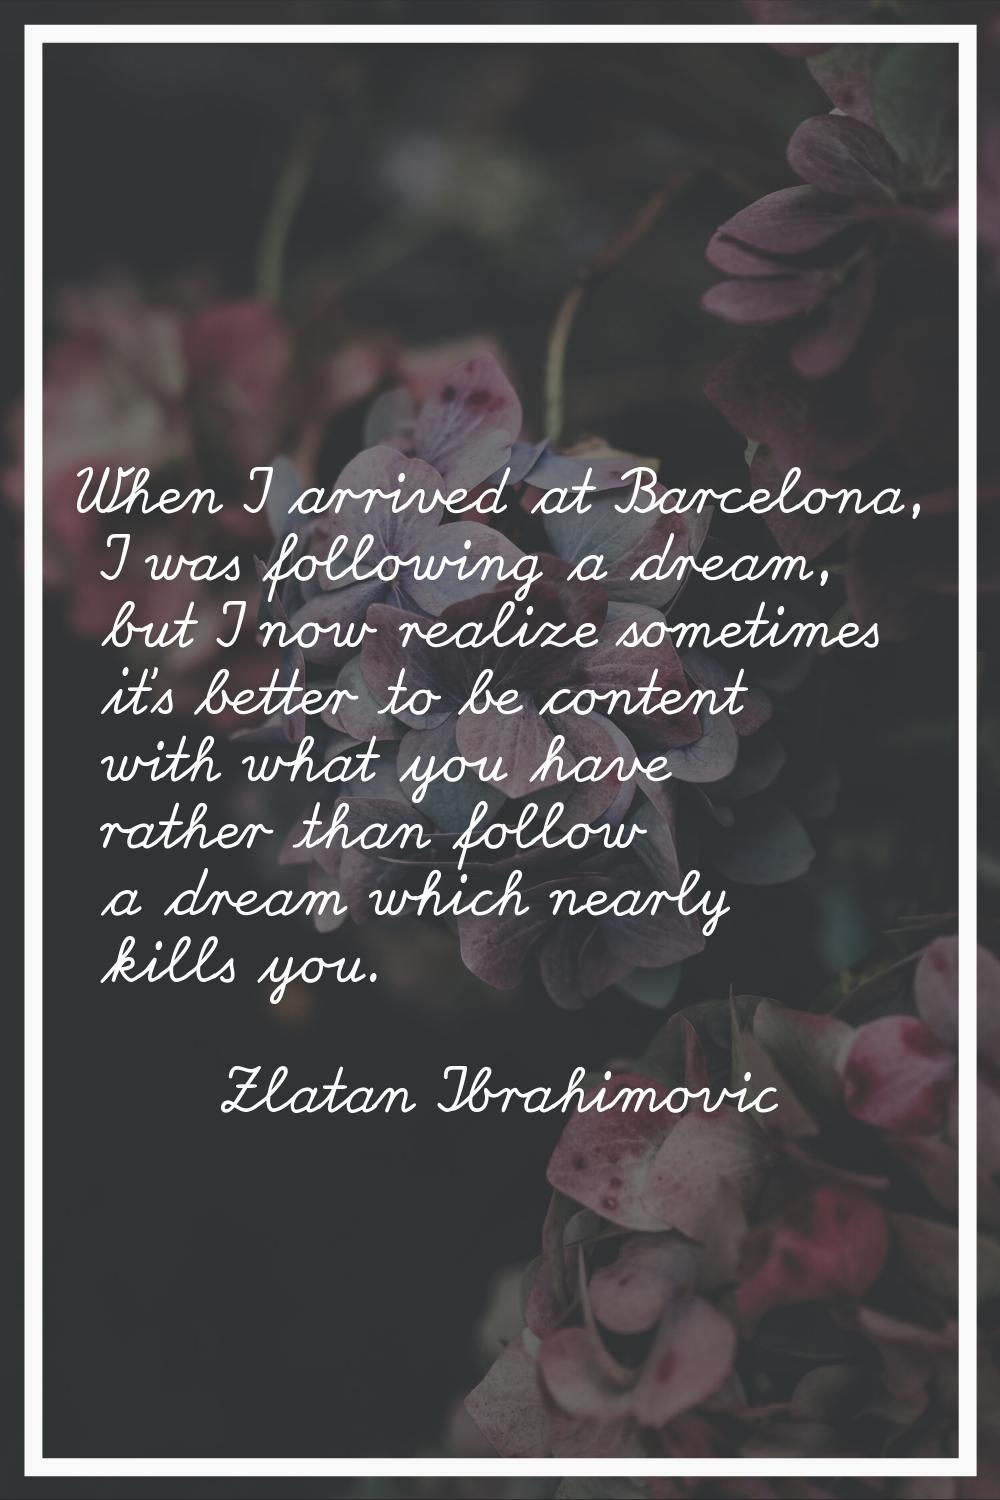 When I arrived at Barcelona, I was following a dream, but I now realize sometimes it's better to be